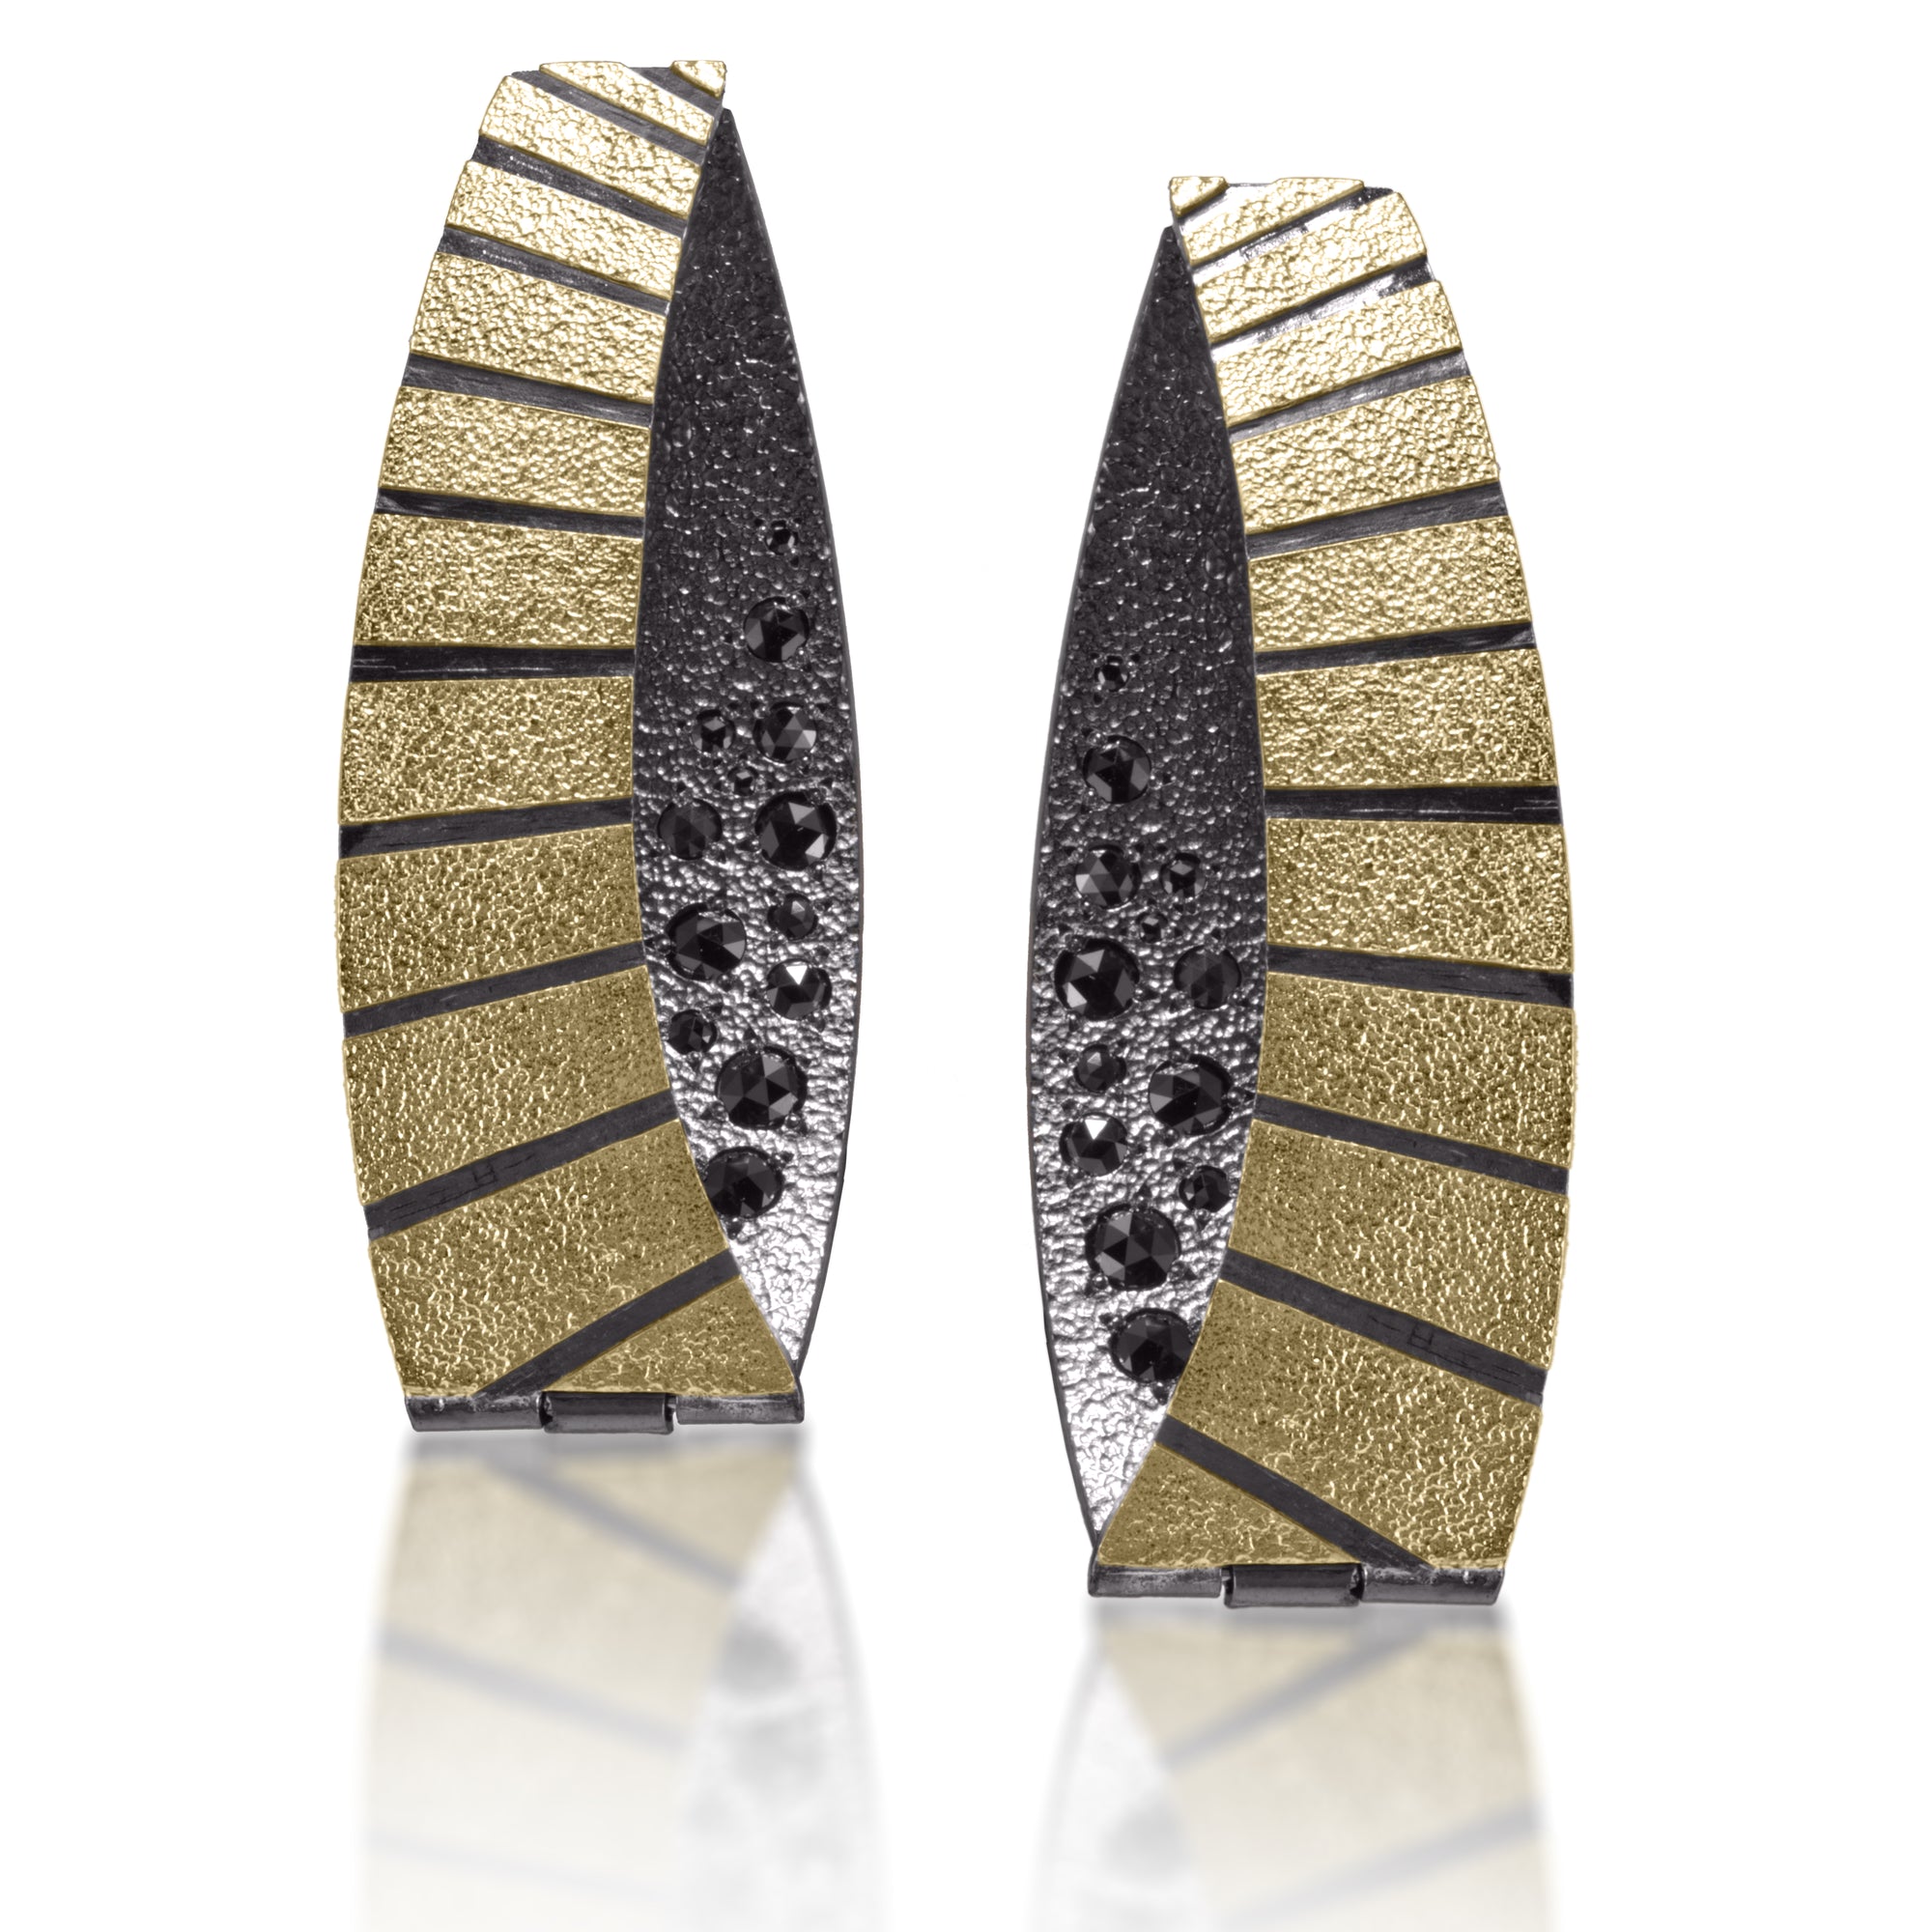 Energy, line and form combine to create Stripe Earring #4.  Made in 18k gold and oxidized sterling silver, the design features graduated, radial stripes.  Bead set rose cut, black diamonds 0.7782 tcw., add a secret shimmer to contrasting areas of oxidized sterling. Hinged huggie style earring with 18k gold posts and a dramatically curved form.  Hand fabricated, stipple textured and engraved mixed metals.